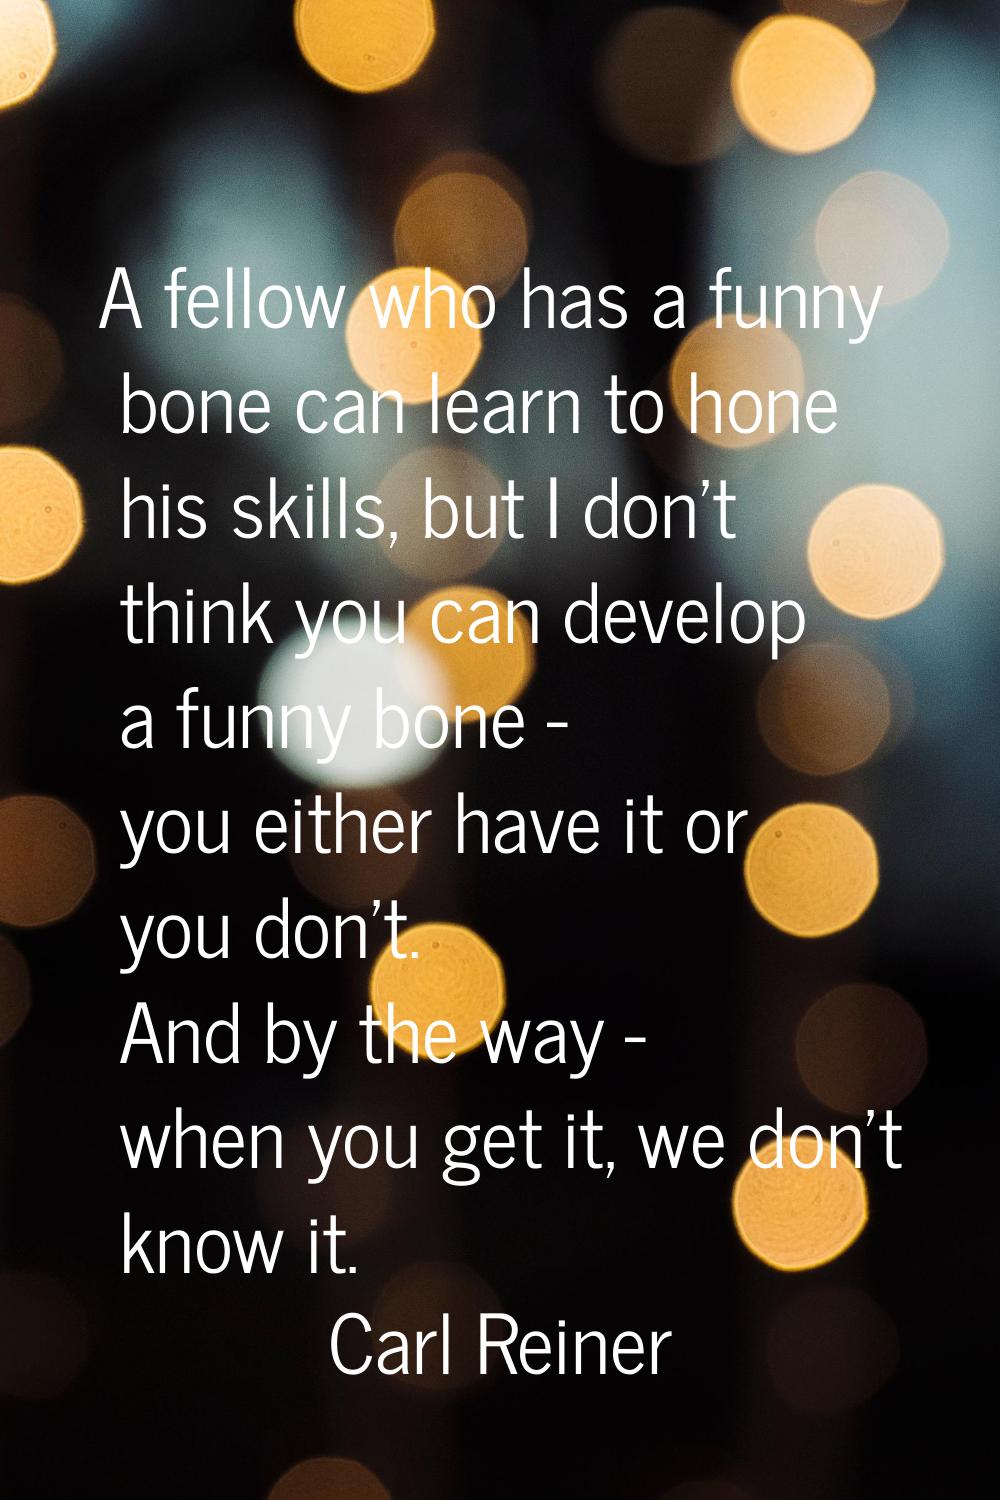 A fellow who has a funny bone can learn to hone his skills, but I don't think you can develop a fun